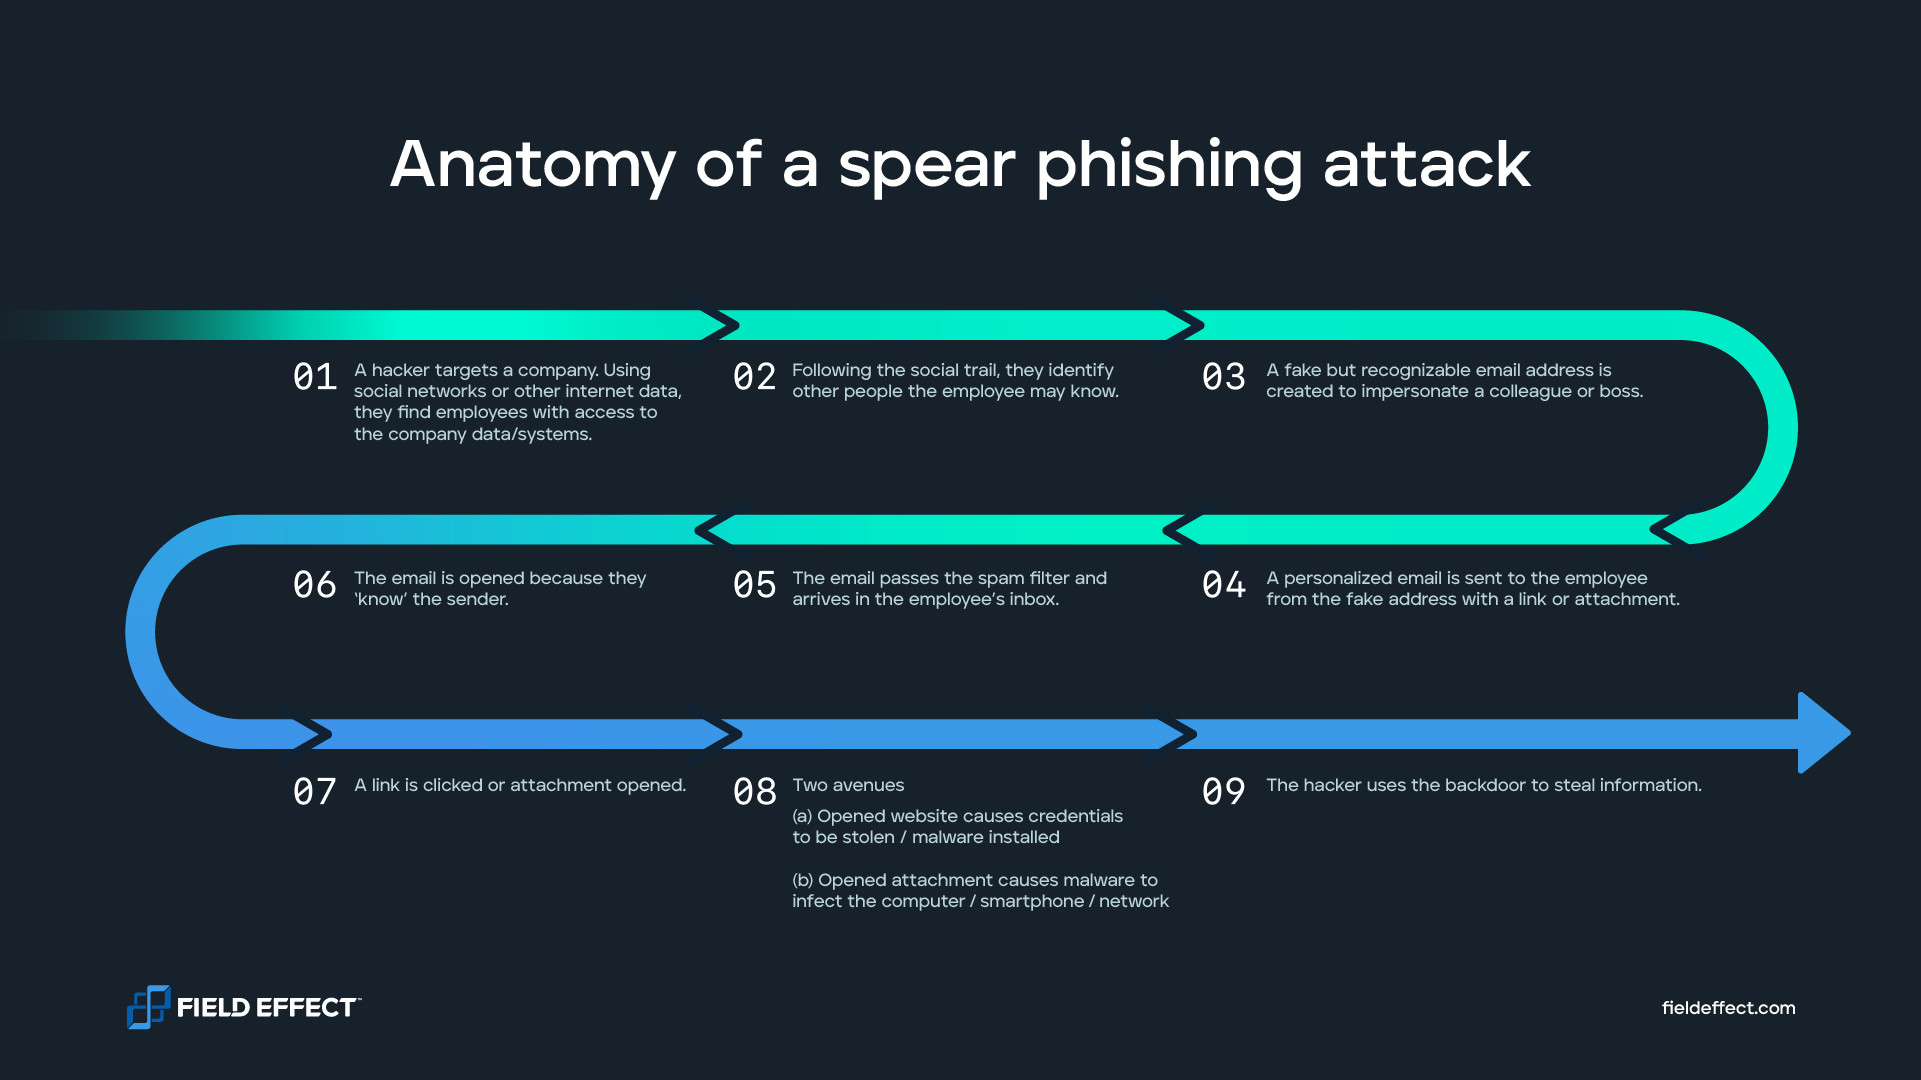 Anatomy of a spear phishing campaign, a type of social engineering.